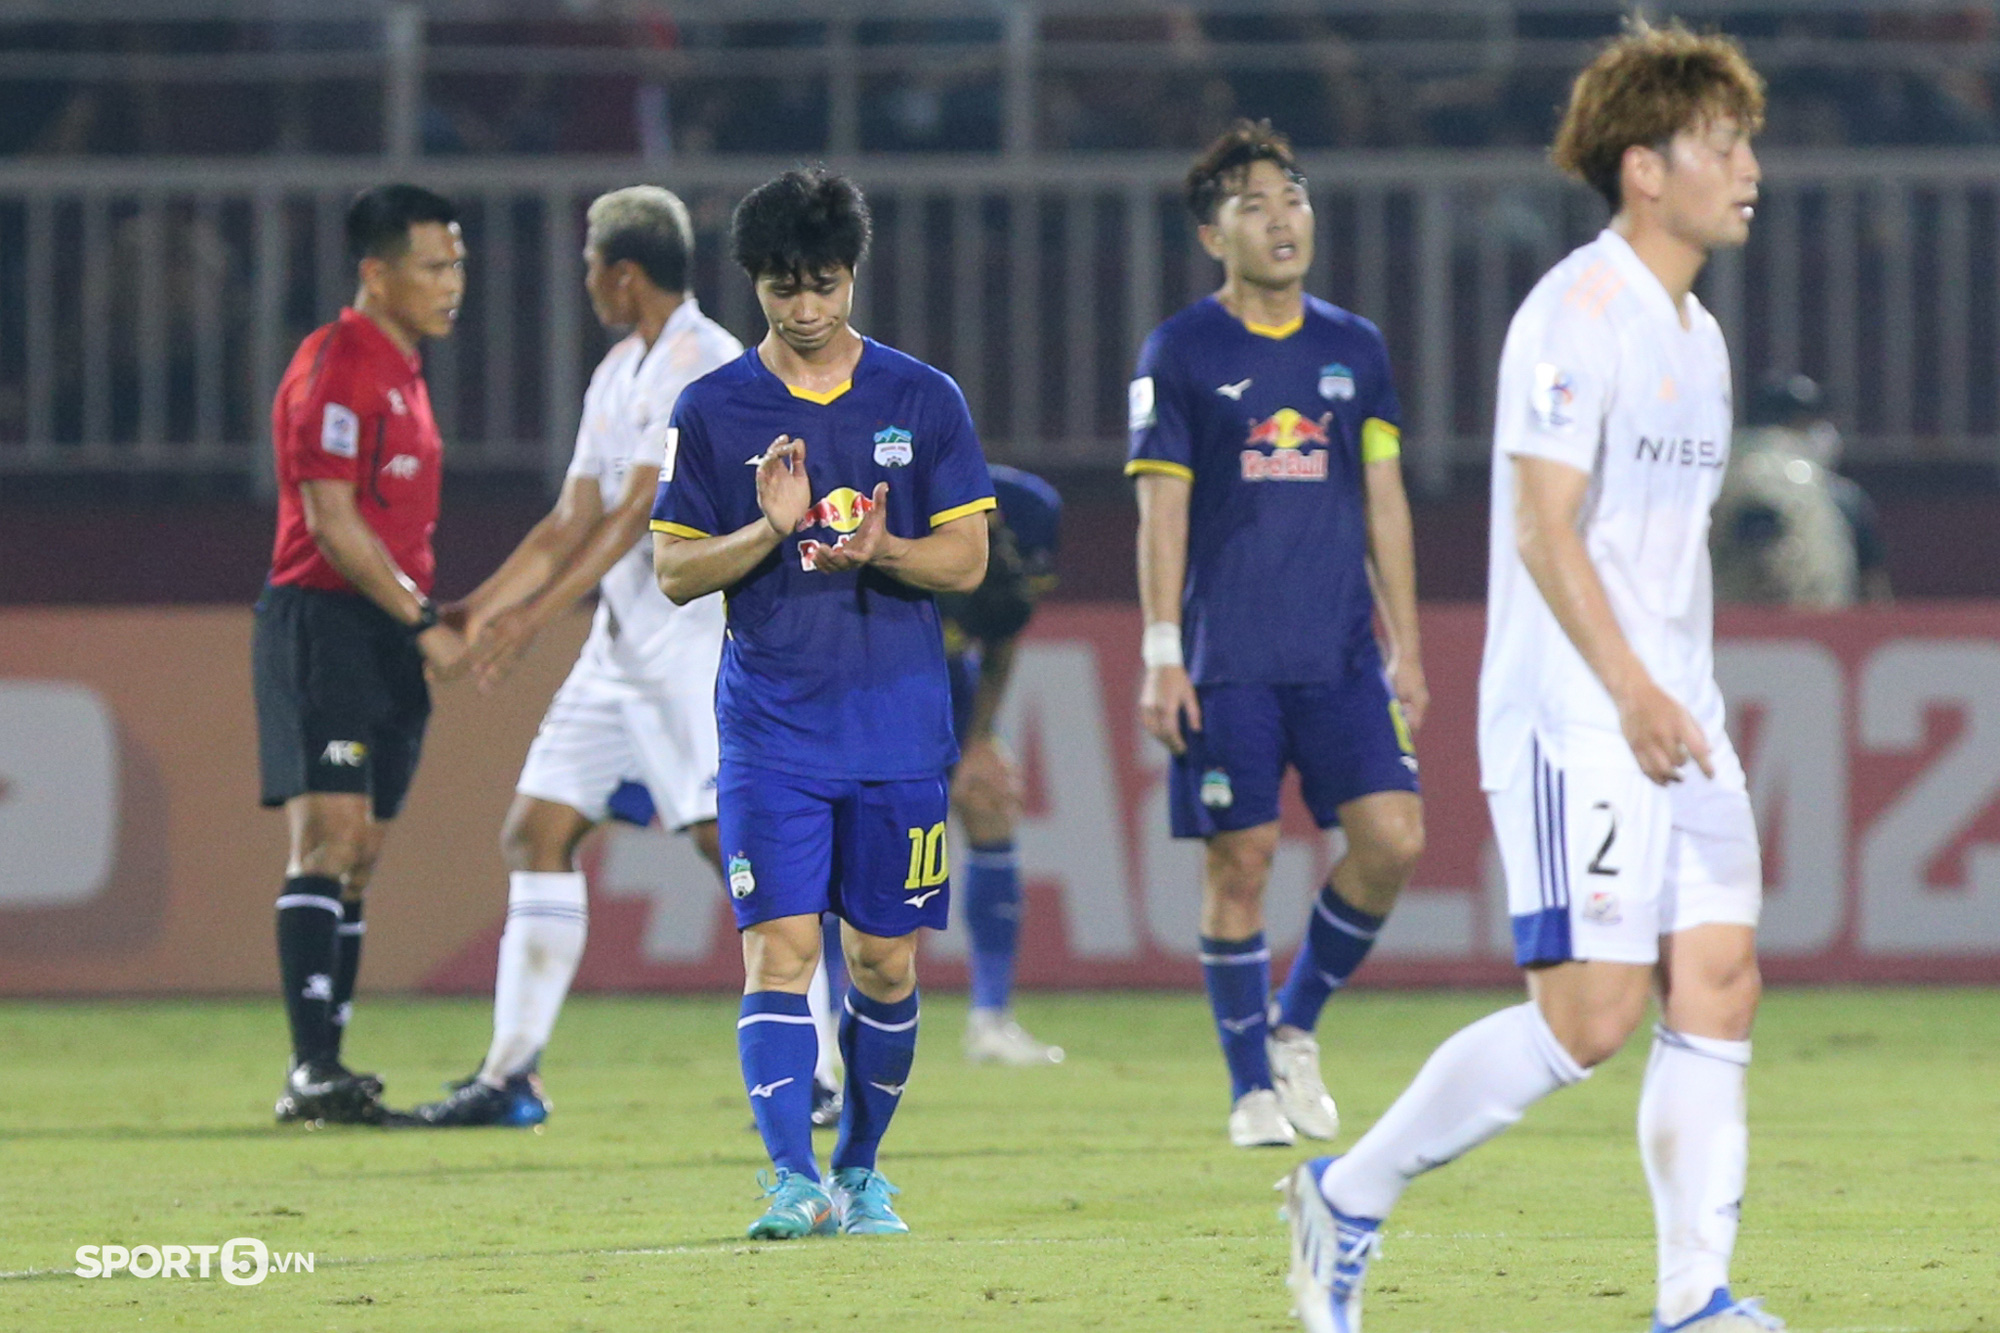 Xuan Truong played fair-play even though the home team was leading in the AFC Champions League - Photo 7.